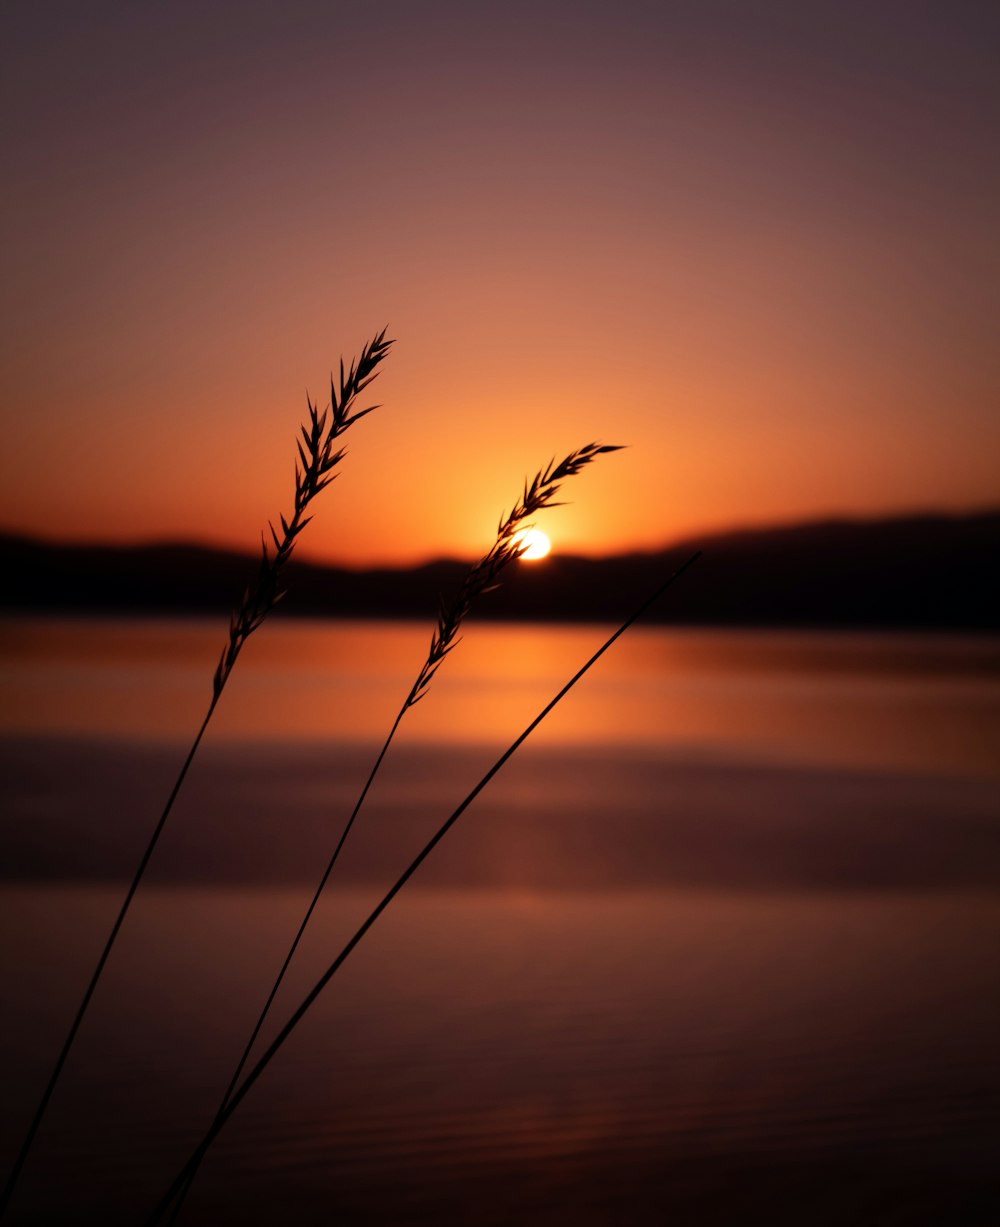 silhouette of grass near body of water during sunset